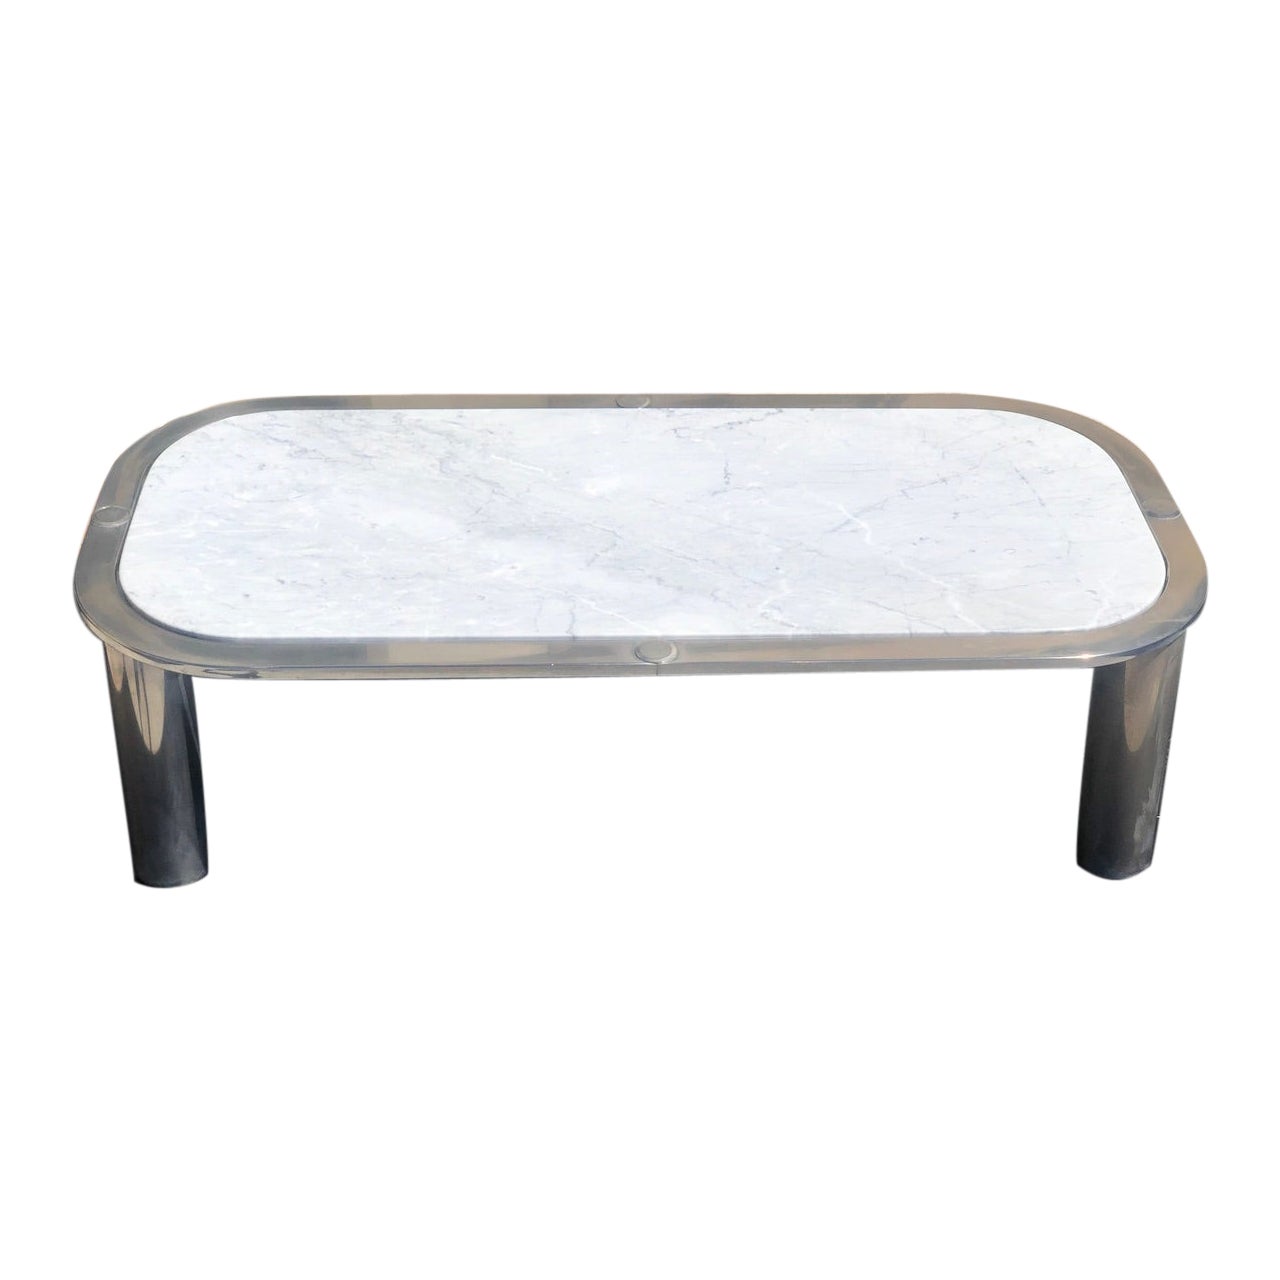 20th Century Italian Design Marble and Chrome Steel Coffee Table, 1970 For Sale